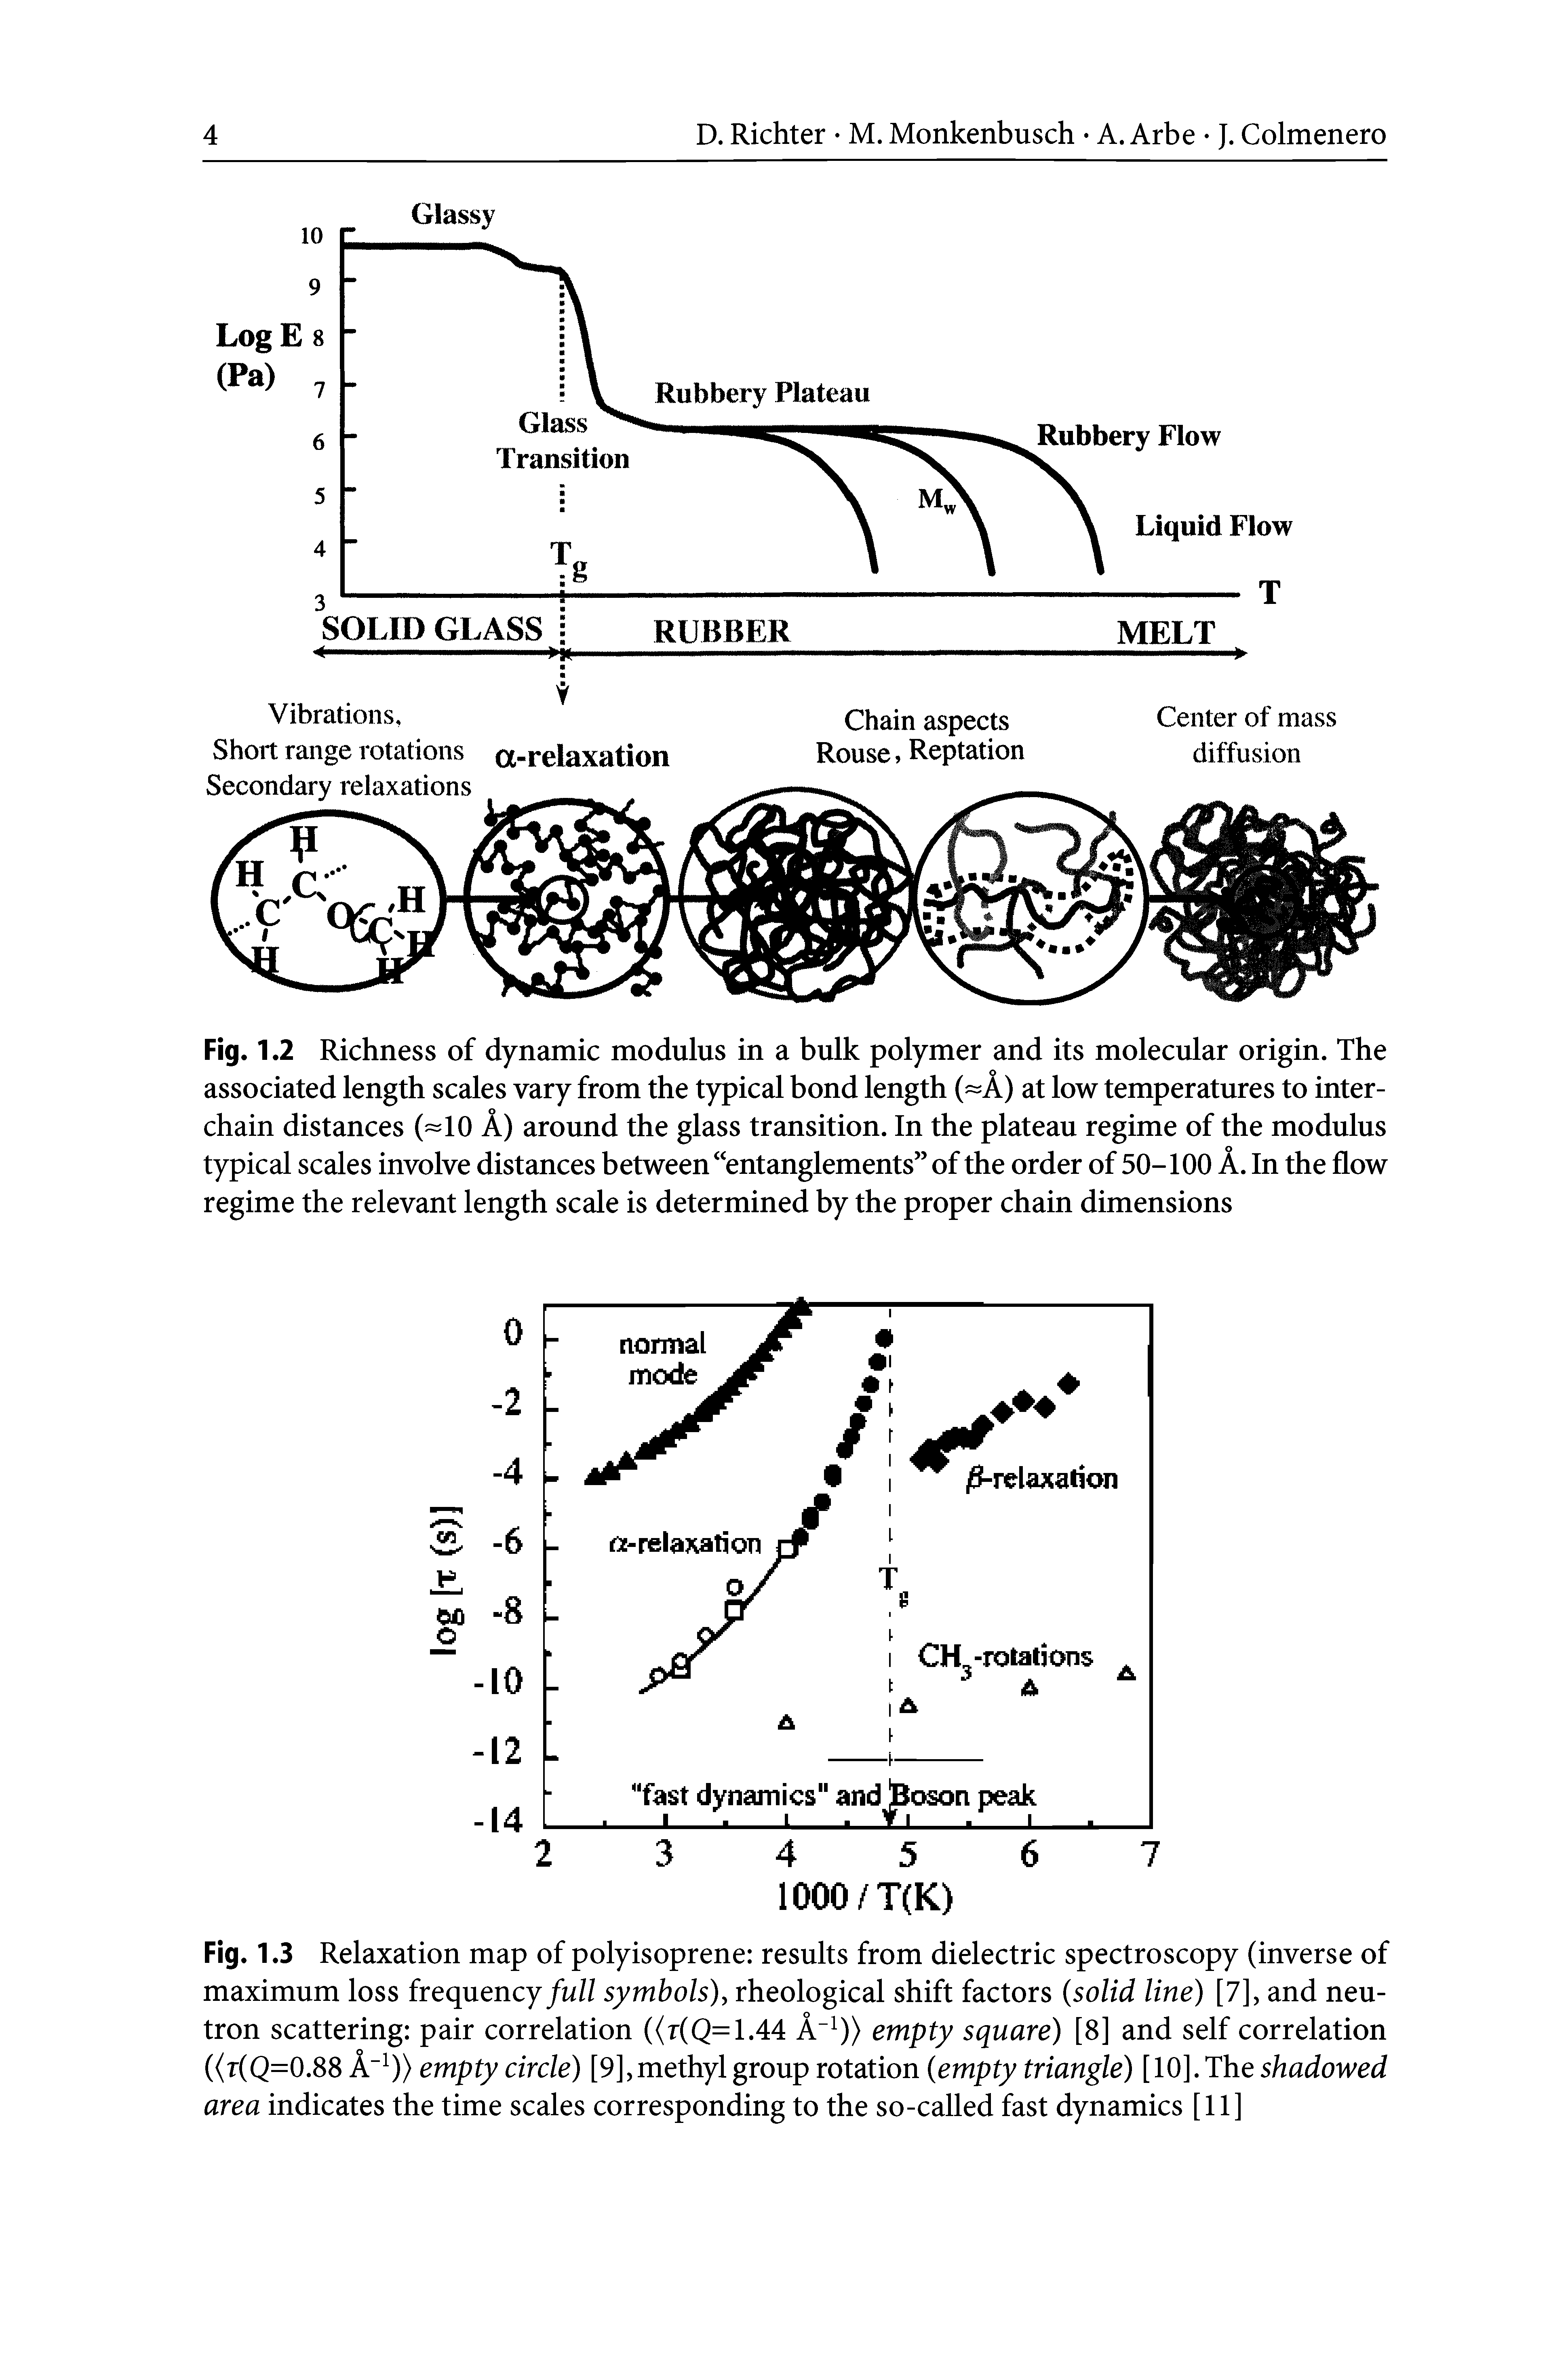 Fig. 1.2 Richness of dynamic modulus in a bulk polymer and its molecular origin. The associated length scales vary from the typical bond length ( A) at low temperatures to interchain distances ( 10 A) around the glass transition. In the plateau regime of the modulus typical scales involve distances between entanglements of the order of 50-100 A. In the flow regime the relevant length scale is determined by the proper chain dimensions...